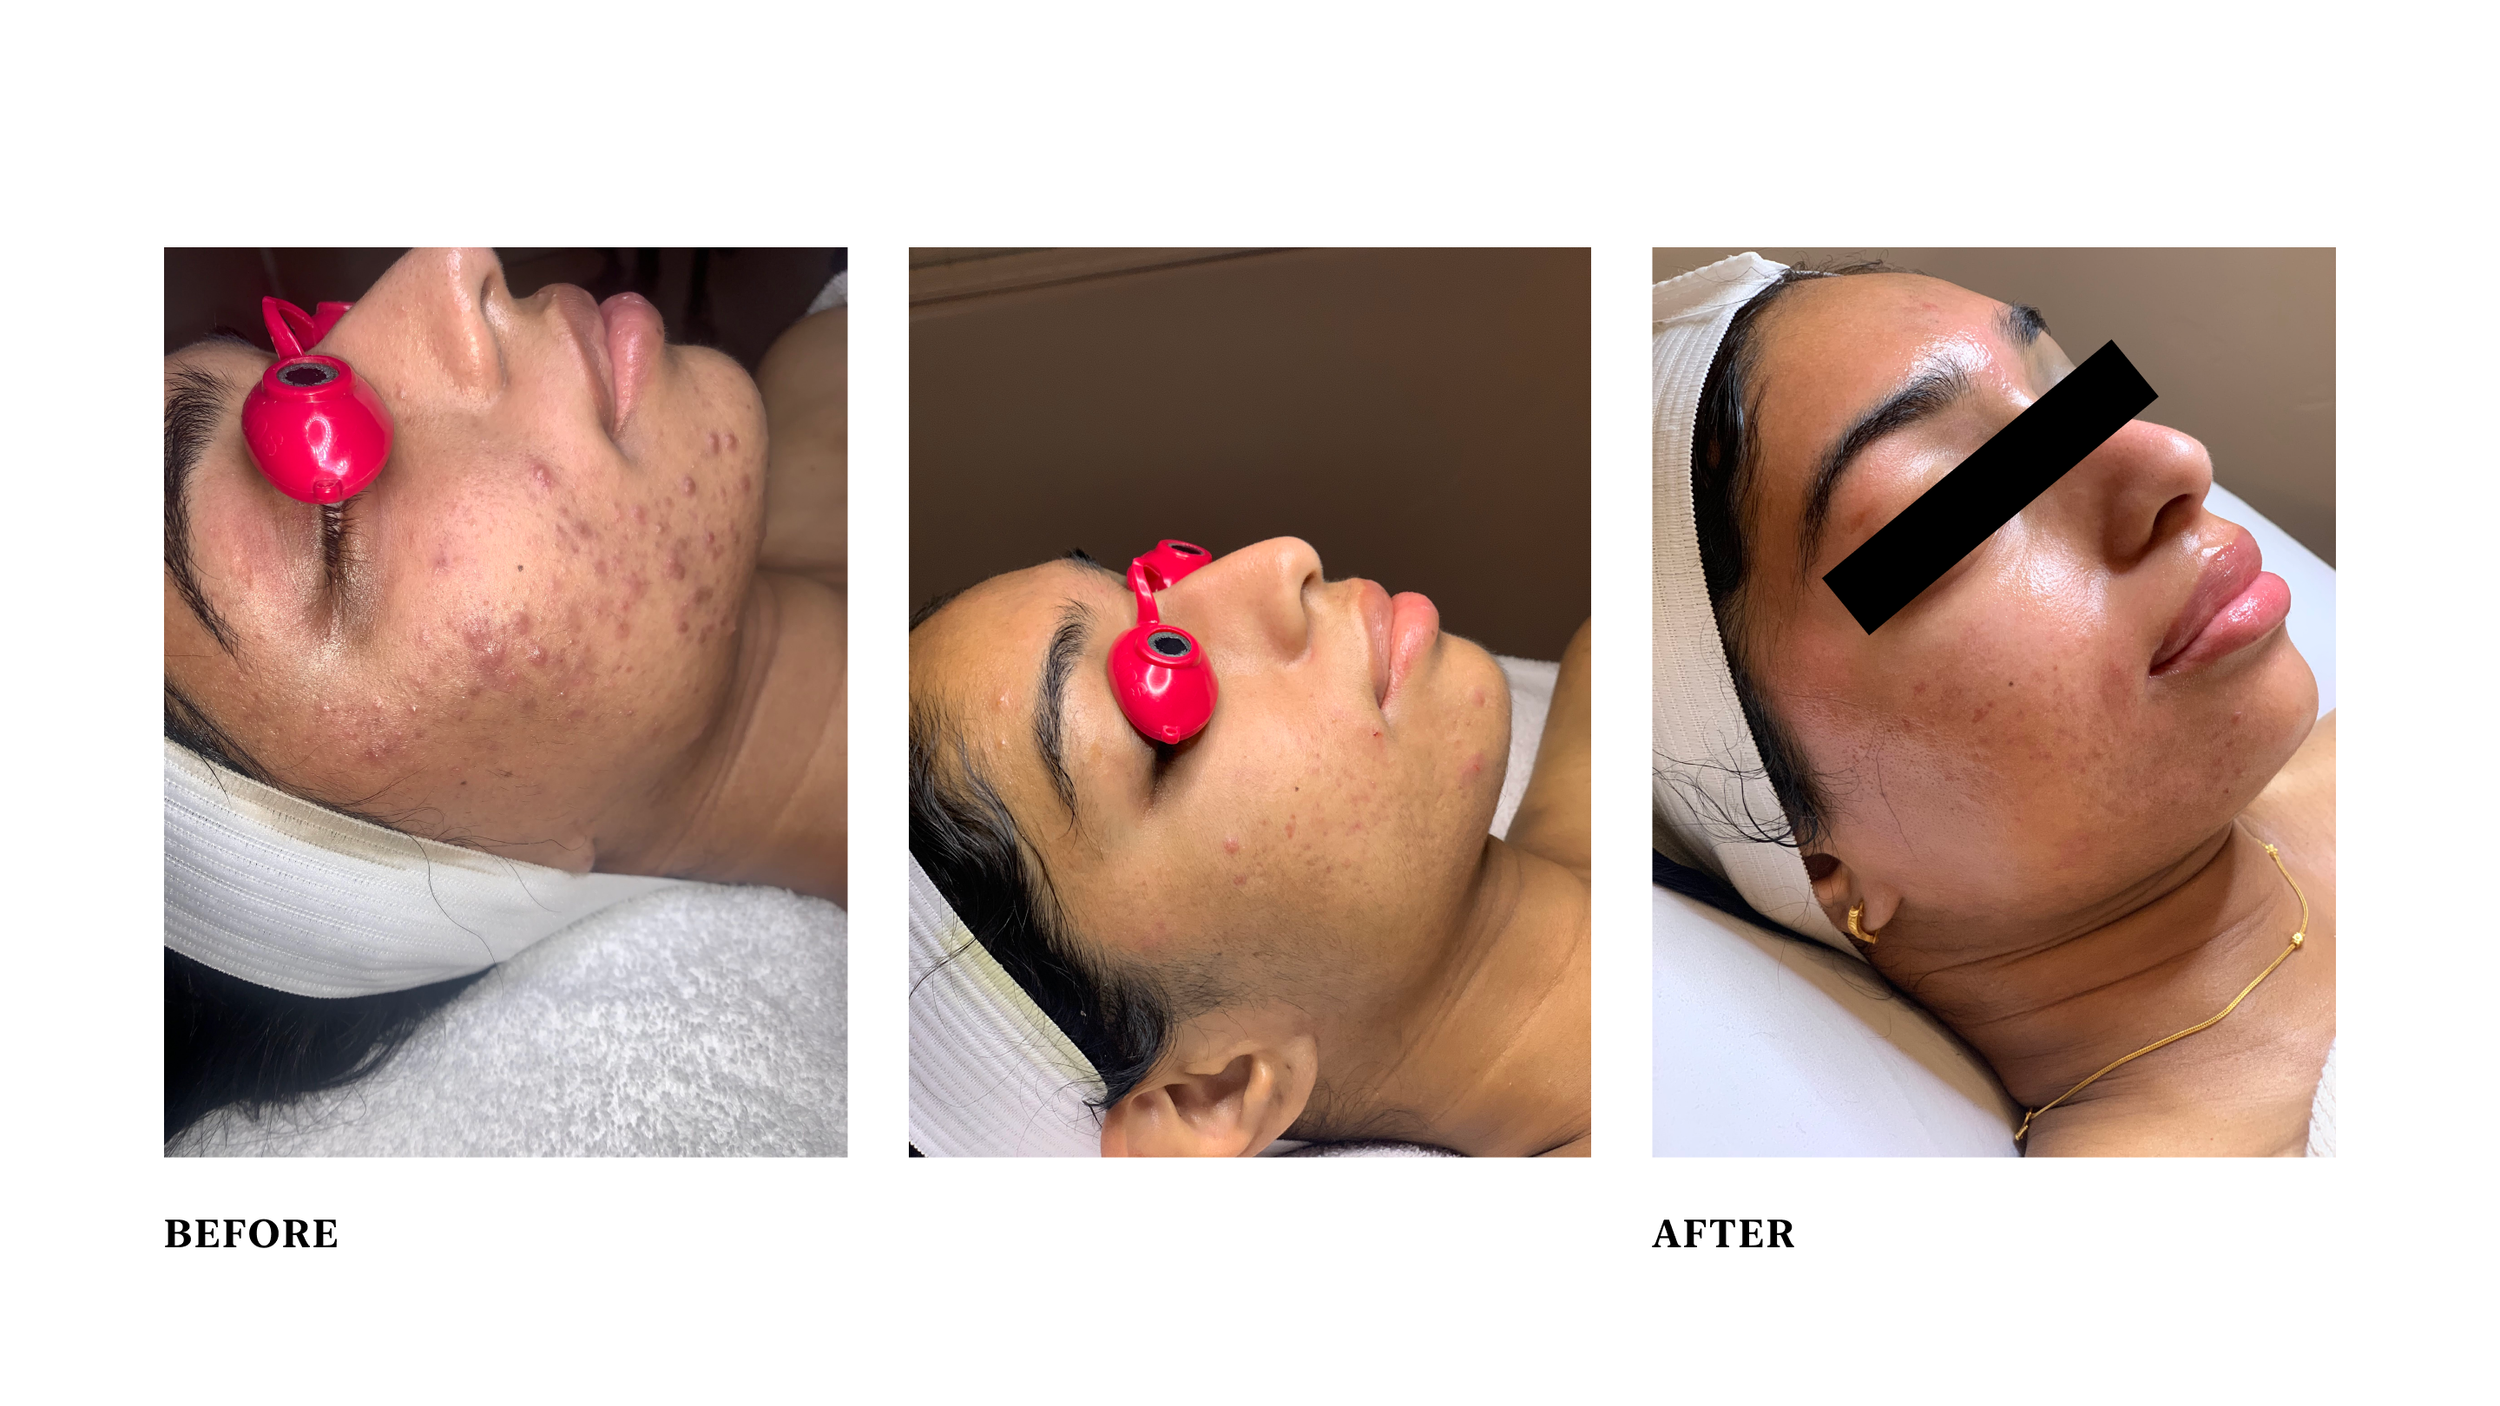  Condition: cystic acne and post inflammatory pigmentation  Treatment: combination of facials using Celluma LED and 2 PCA peels. Client consistently used customized PCA skincare at home in between treatments. 